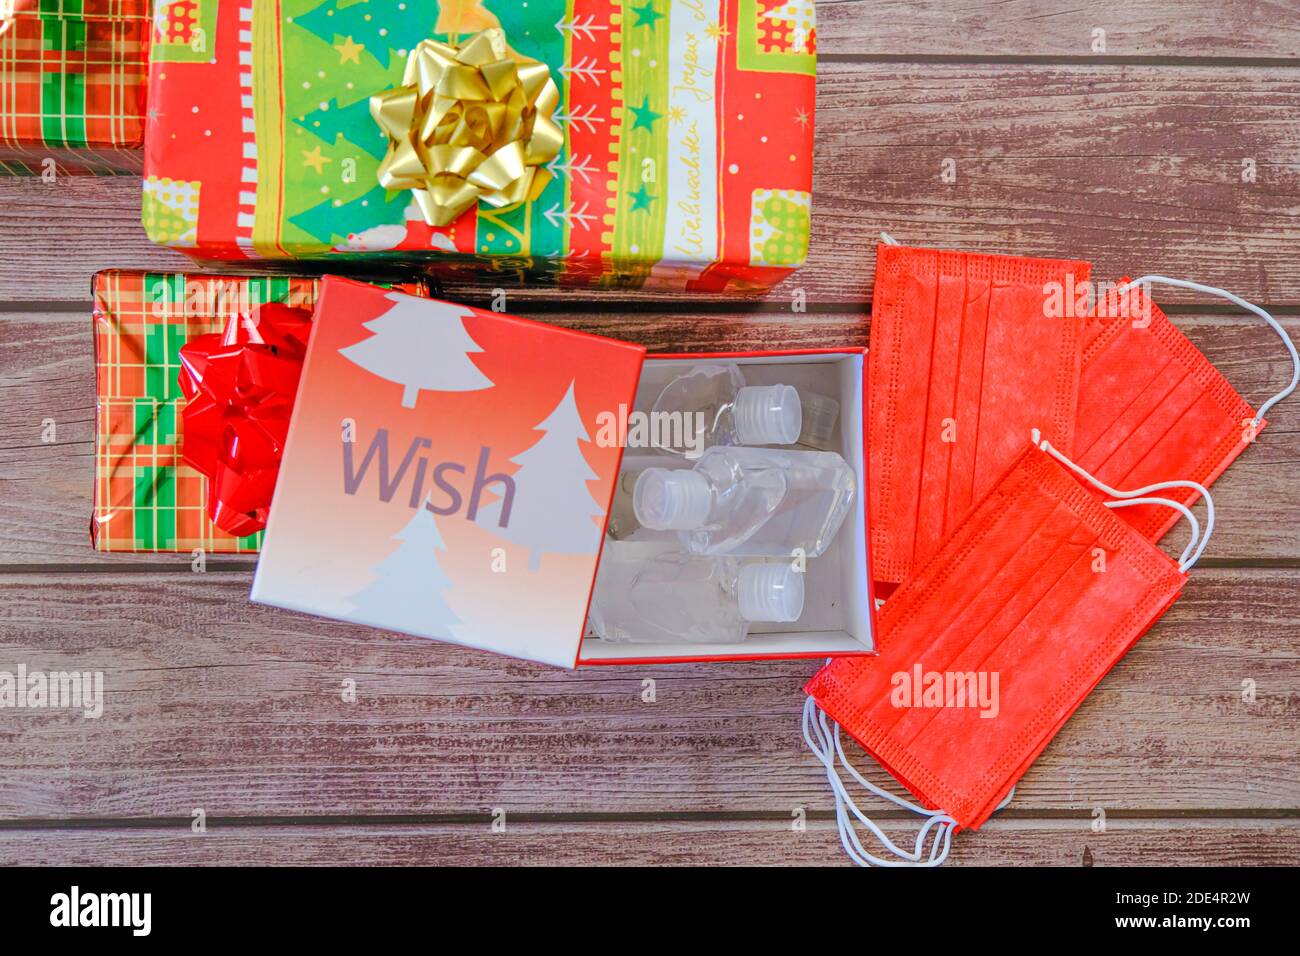 Christmas gift wrapped presents with face masks and hand sanitizer bottles Stock Photo